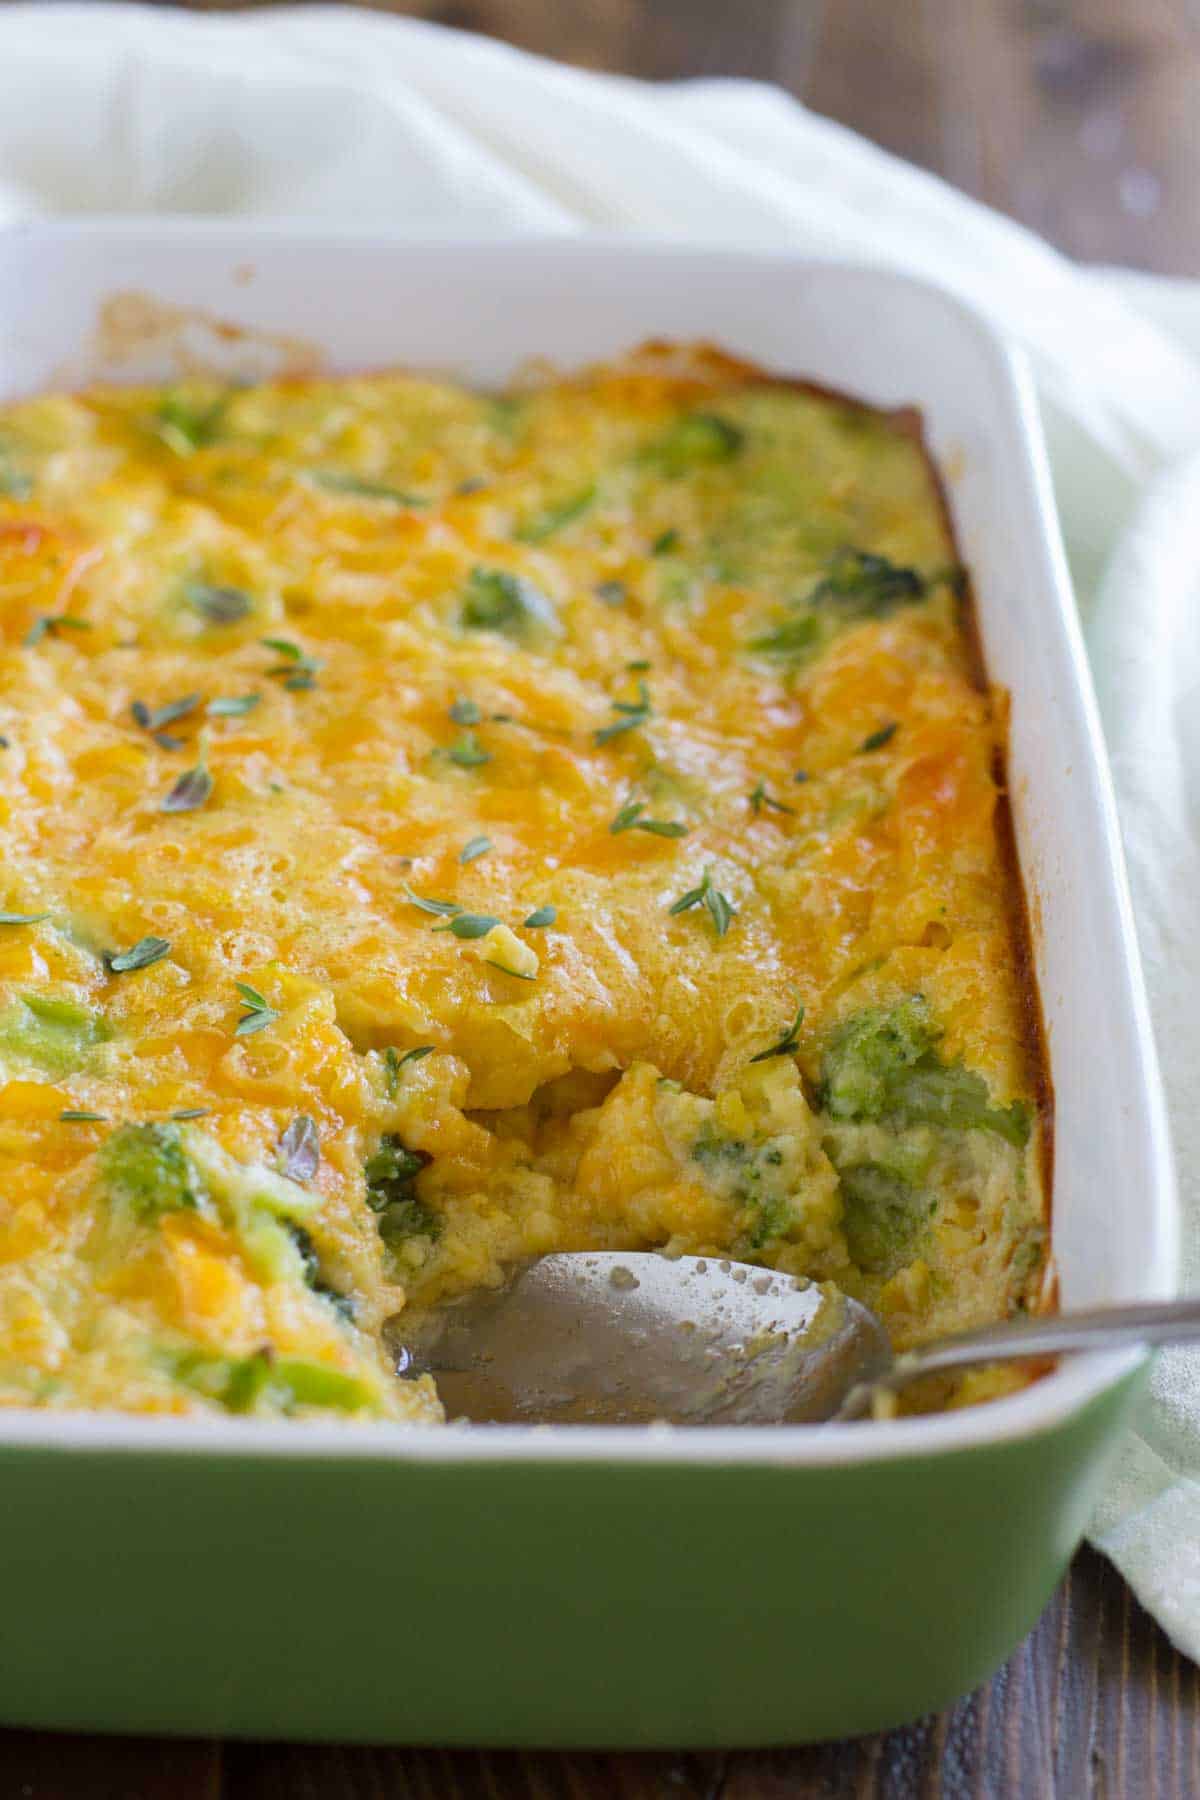 Scalloped Corn and Broccoli in a casserole dish with serving spoon